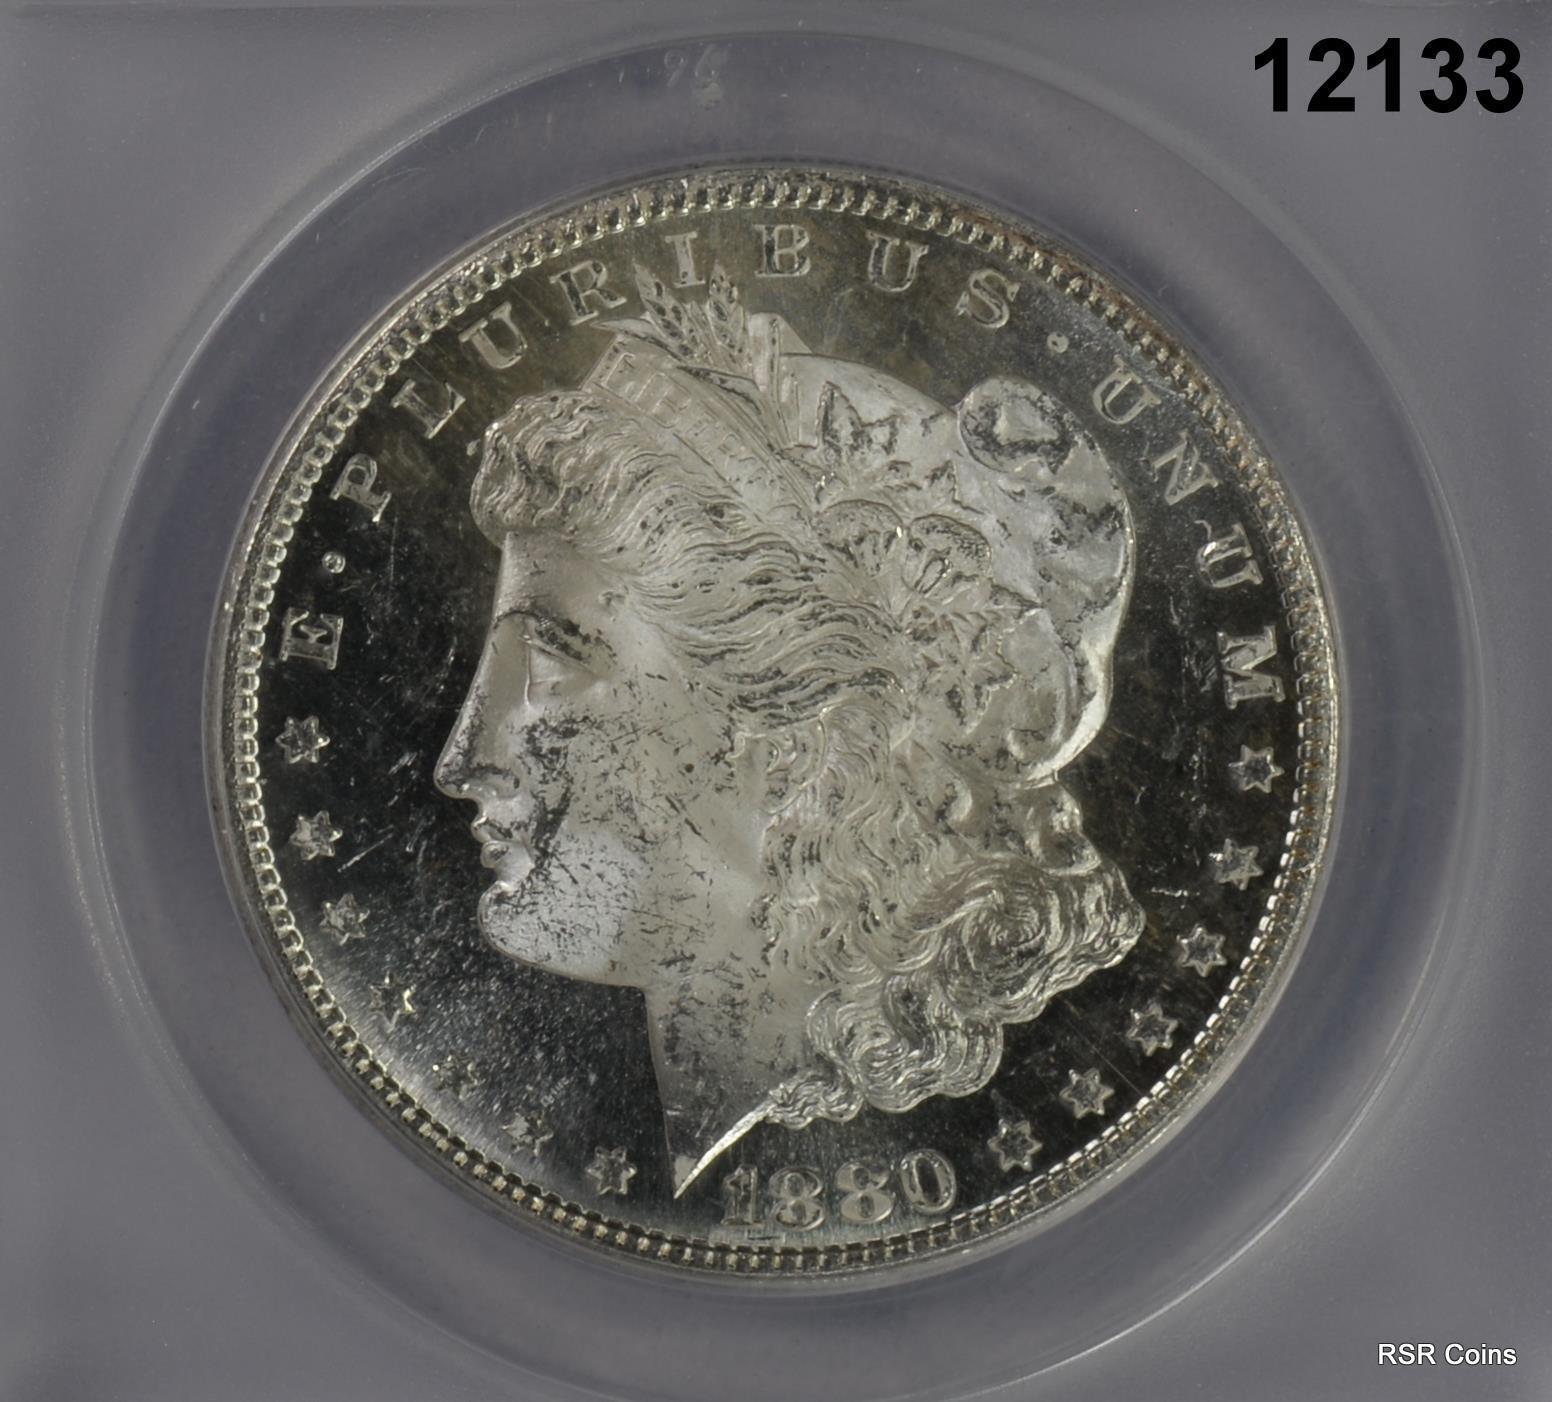 1880 S MORGAN SILVER DOLLAR ANACS CERTIFIED MS63 OBVERSE DMPL WOW FROSTY! #12133